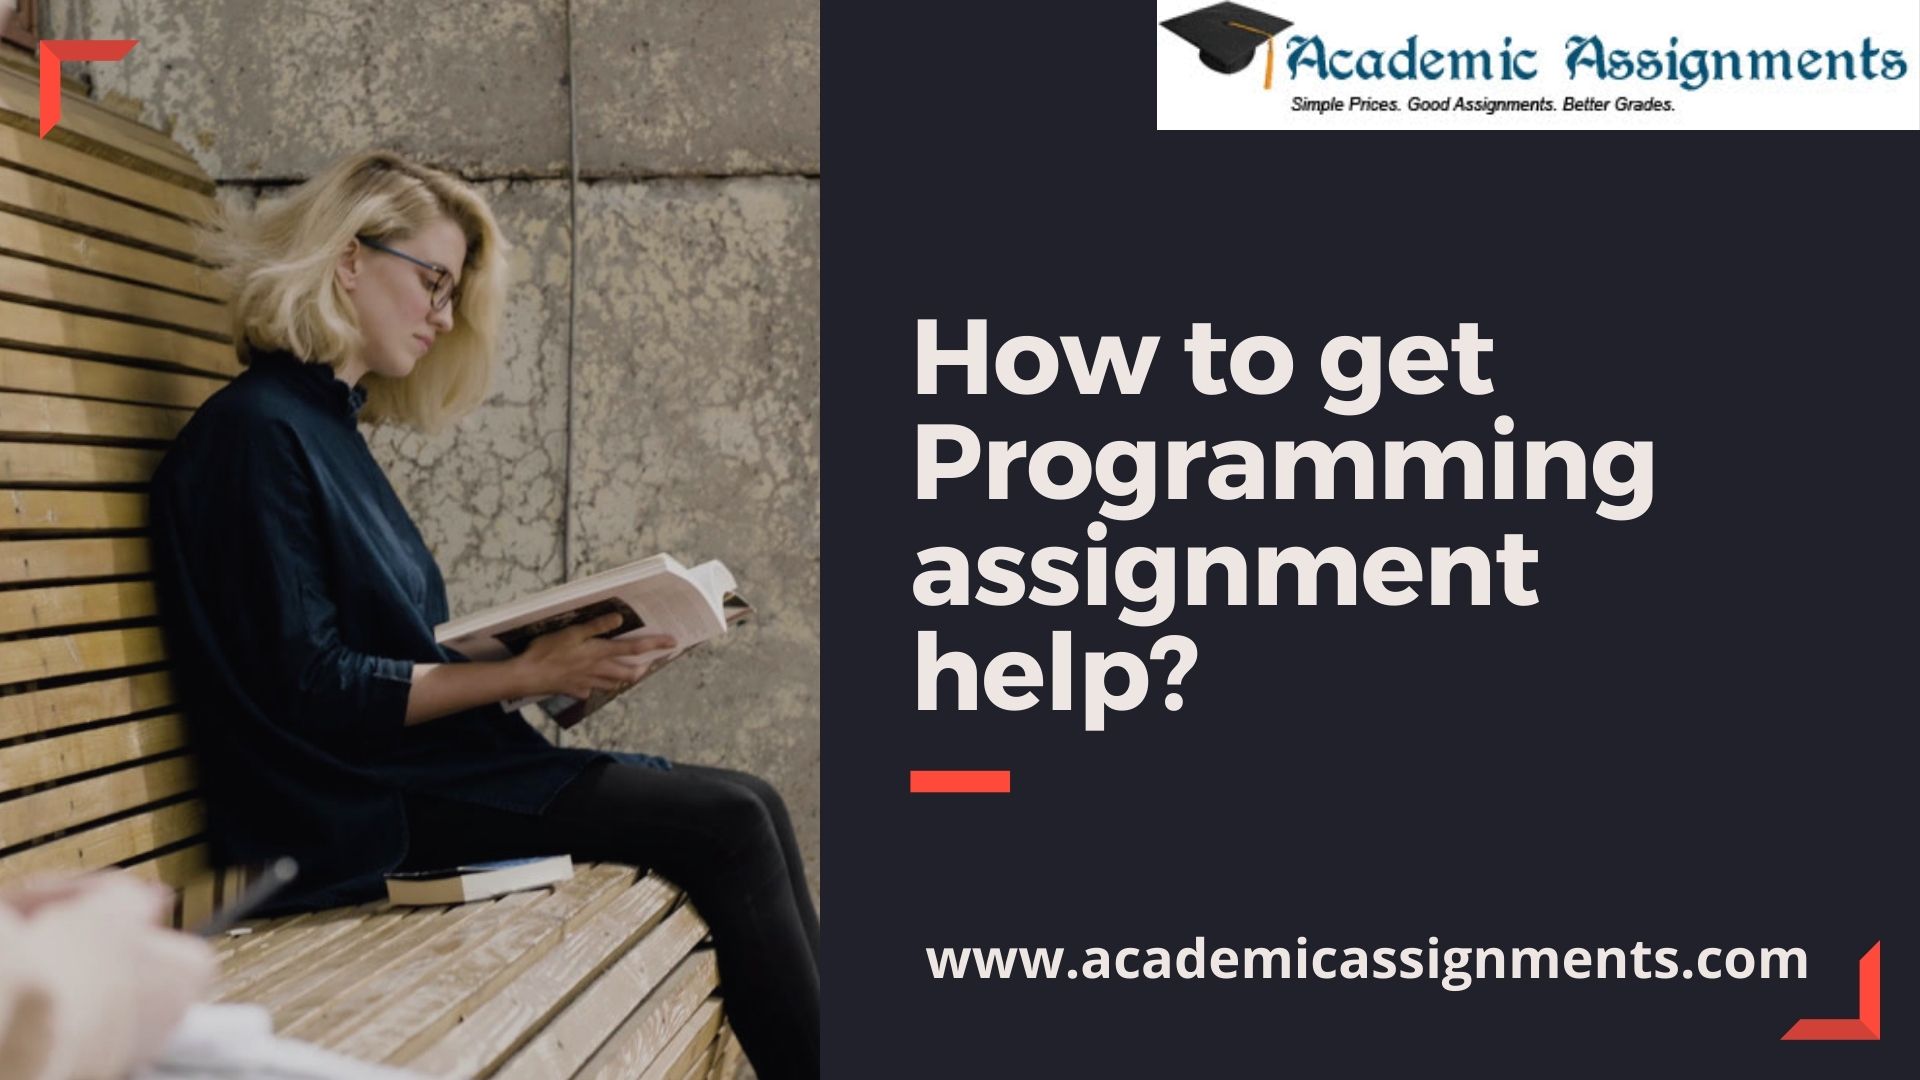 How to get Programming assignment help